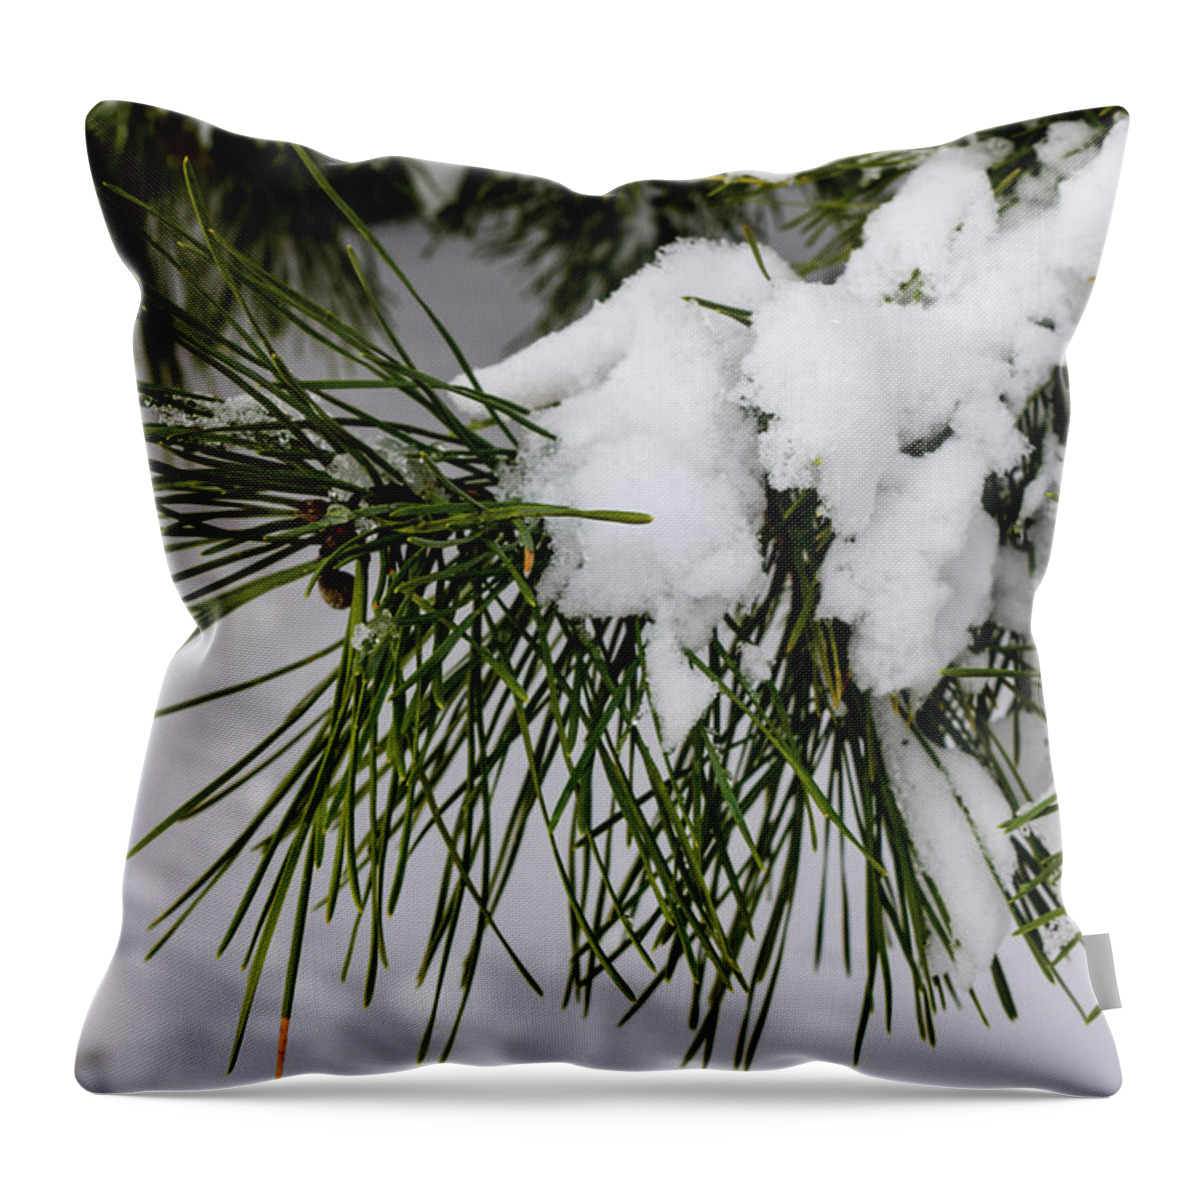 Snow Throw Pillow featuring the photograph Snowy Branch by Nicole Lloyd